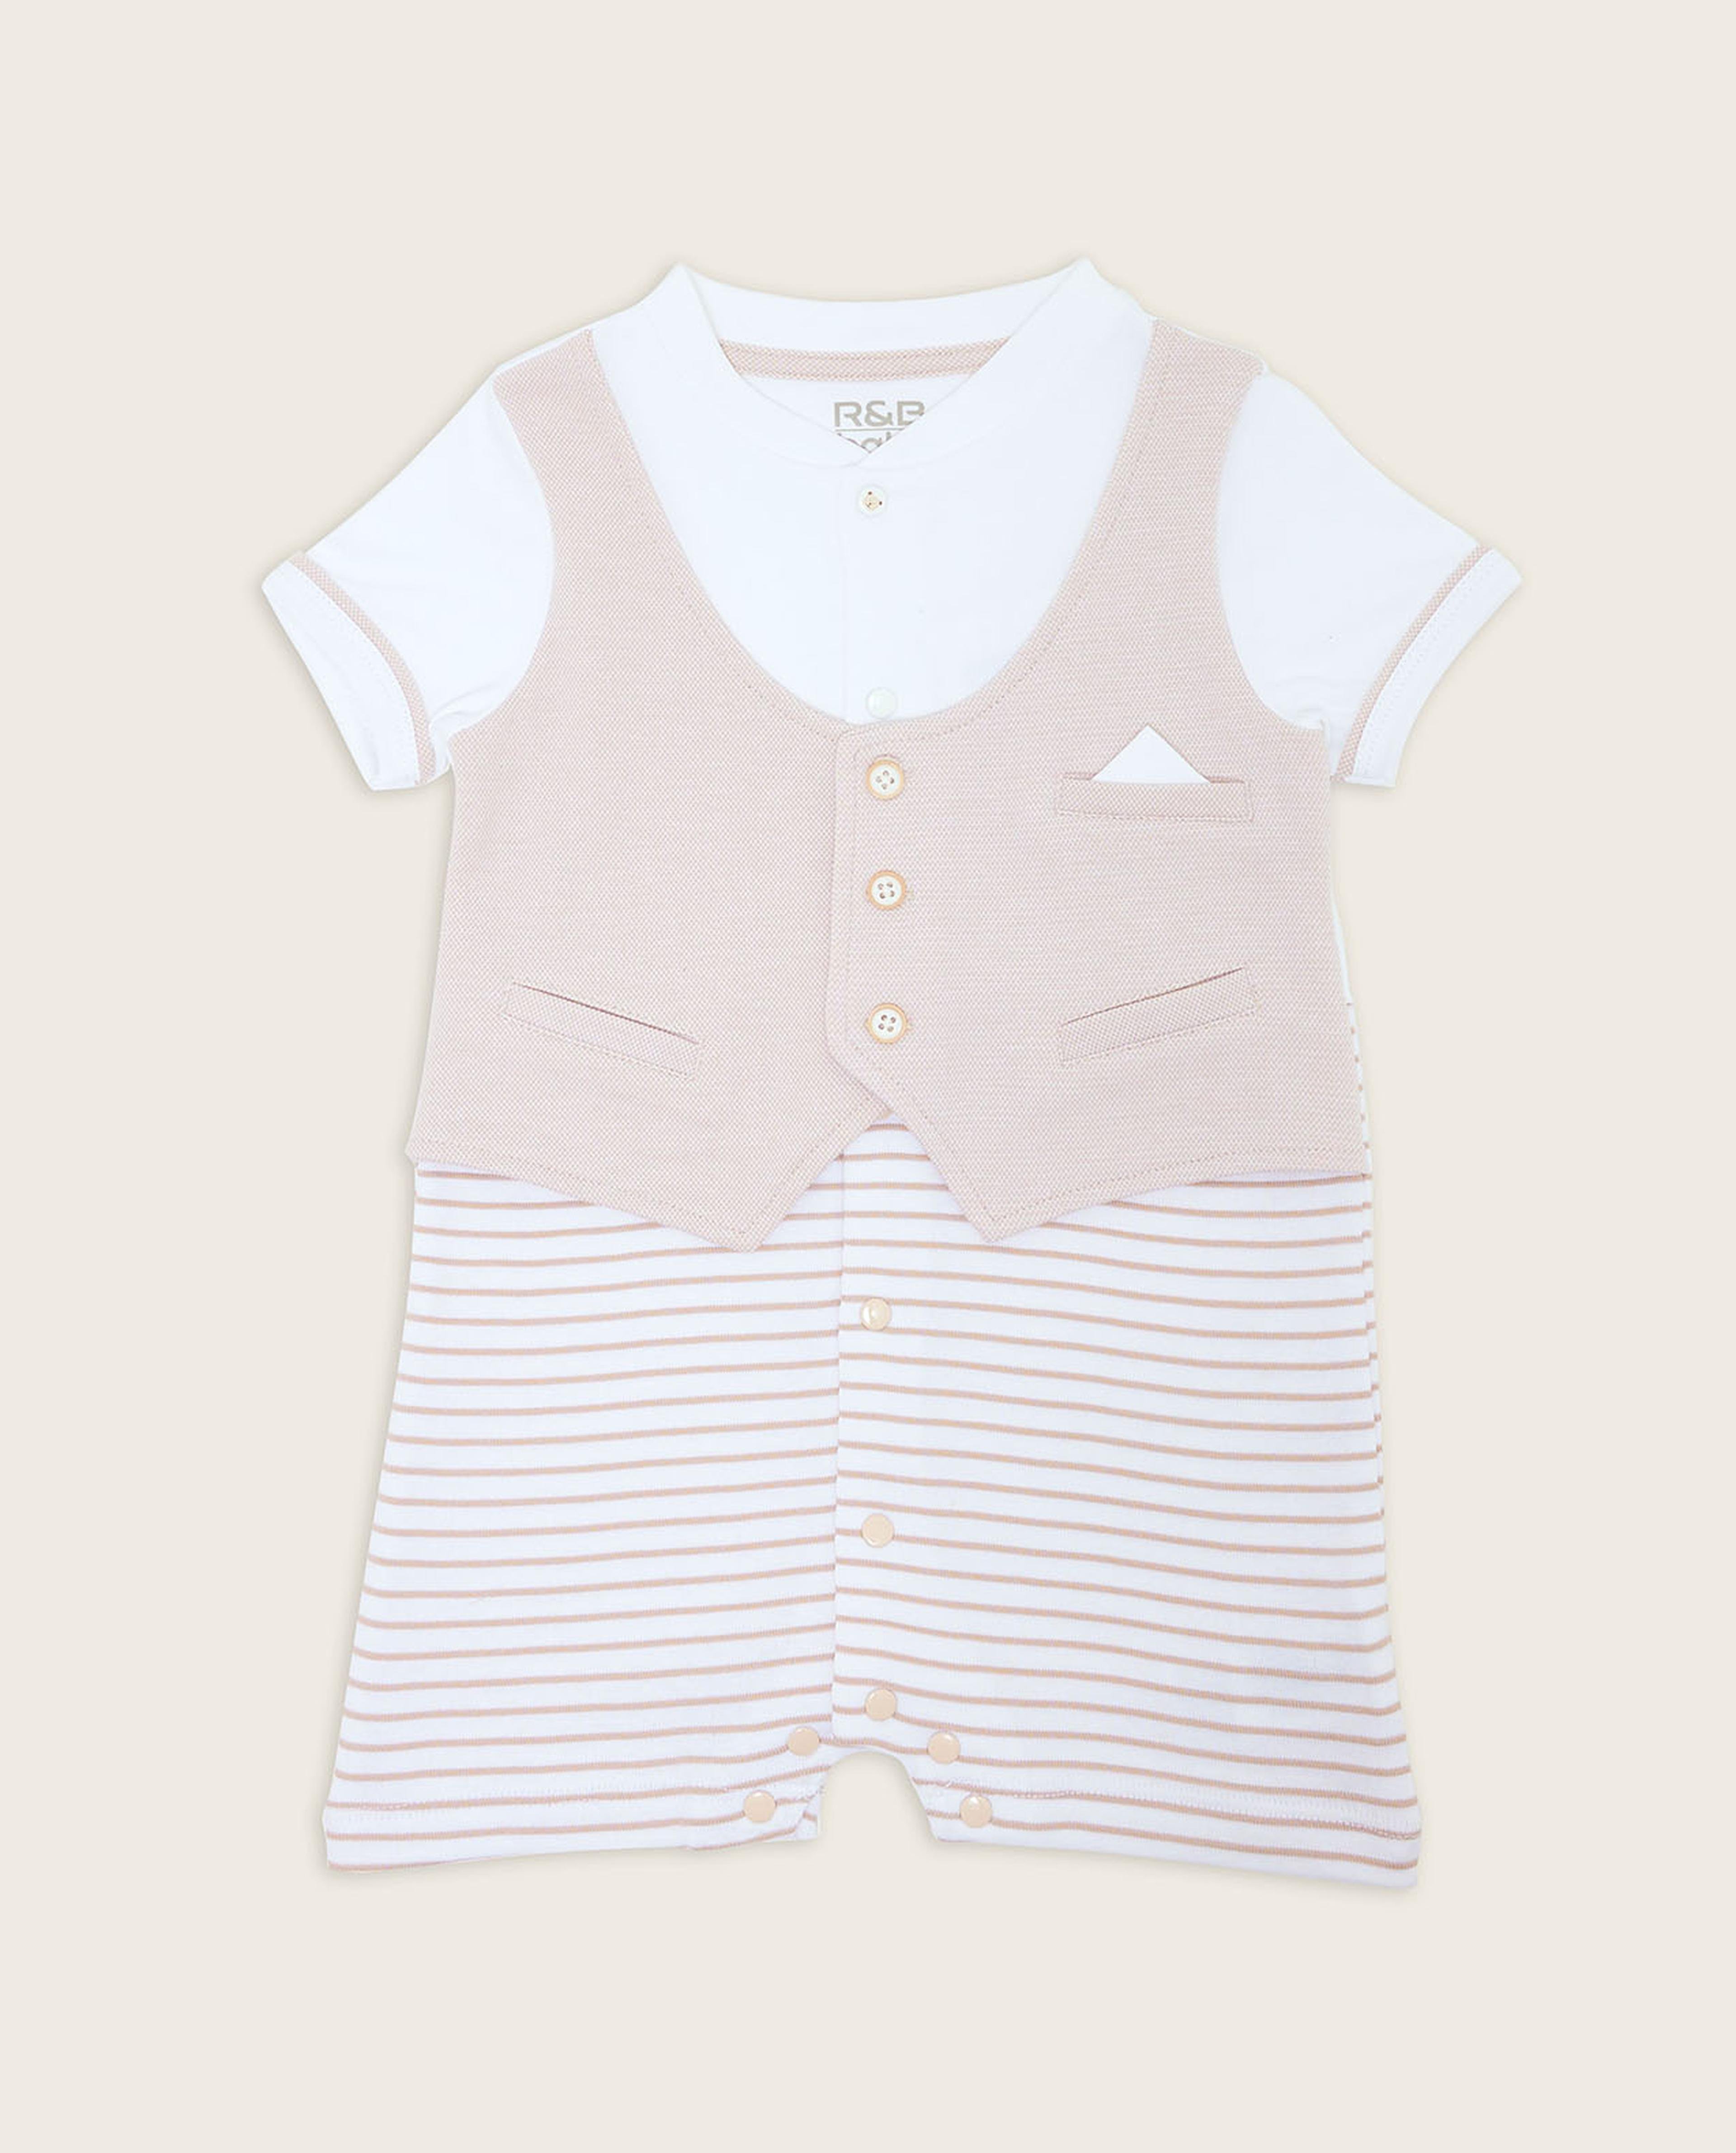 Striped Rompers with Shirt Collar and Short Sleeves